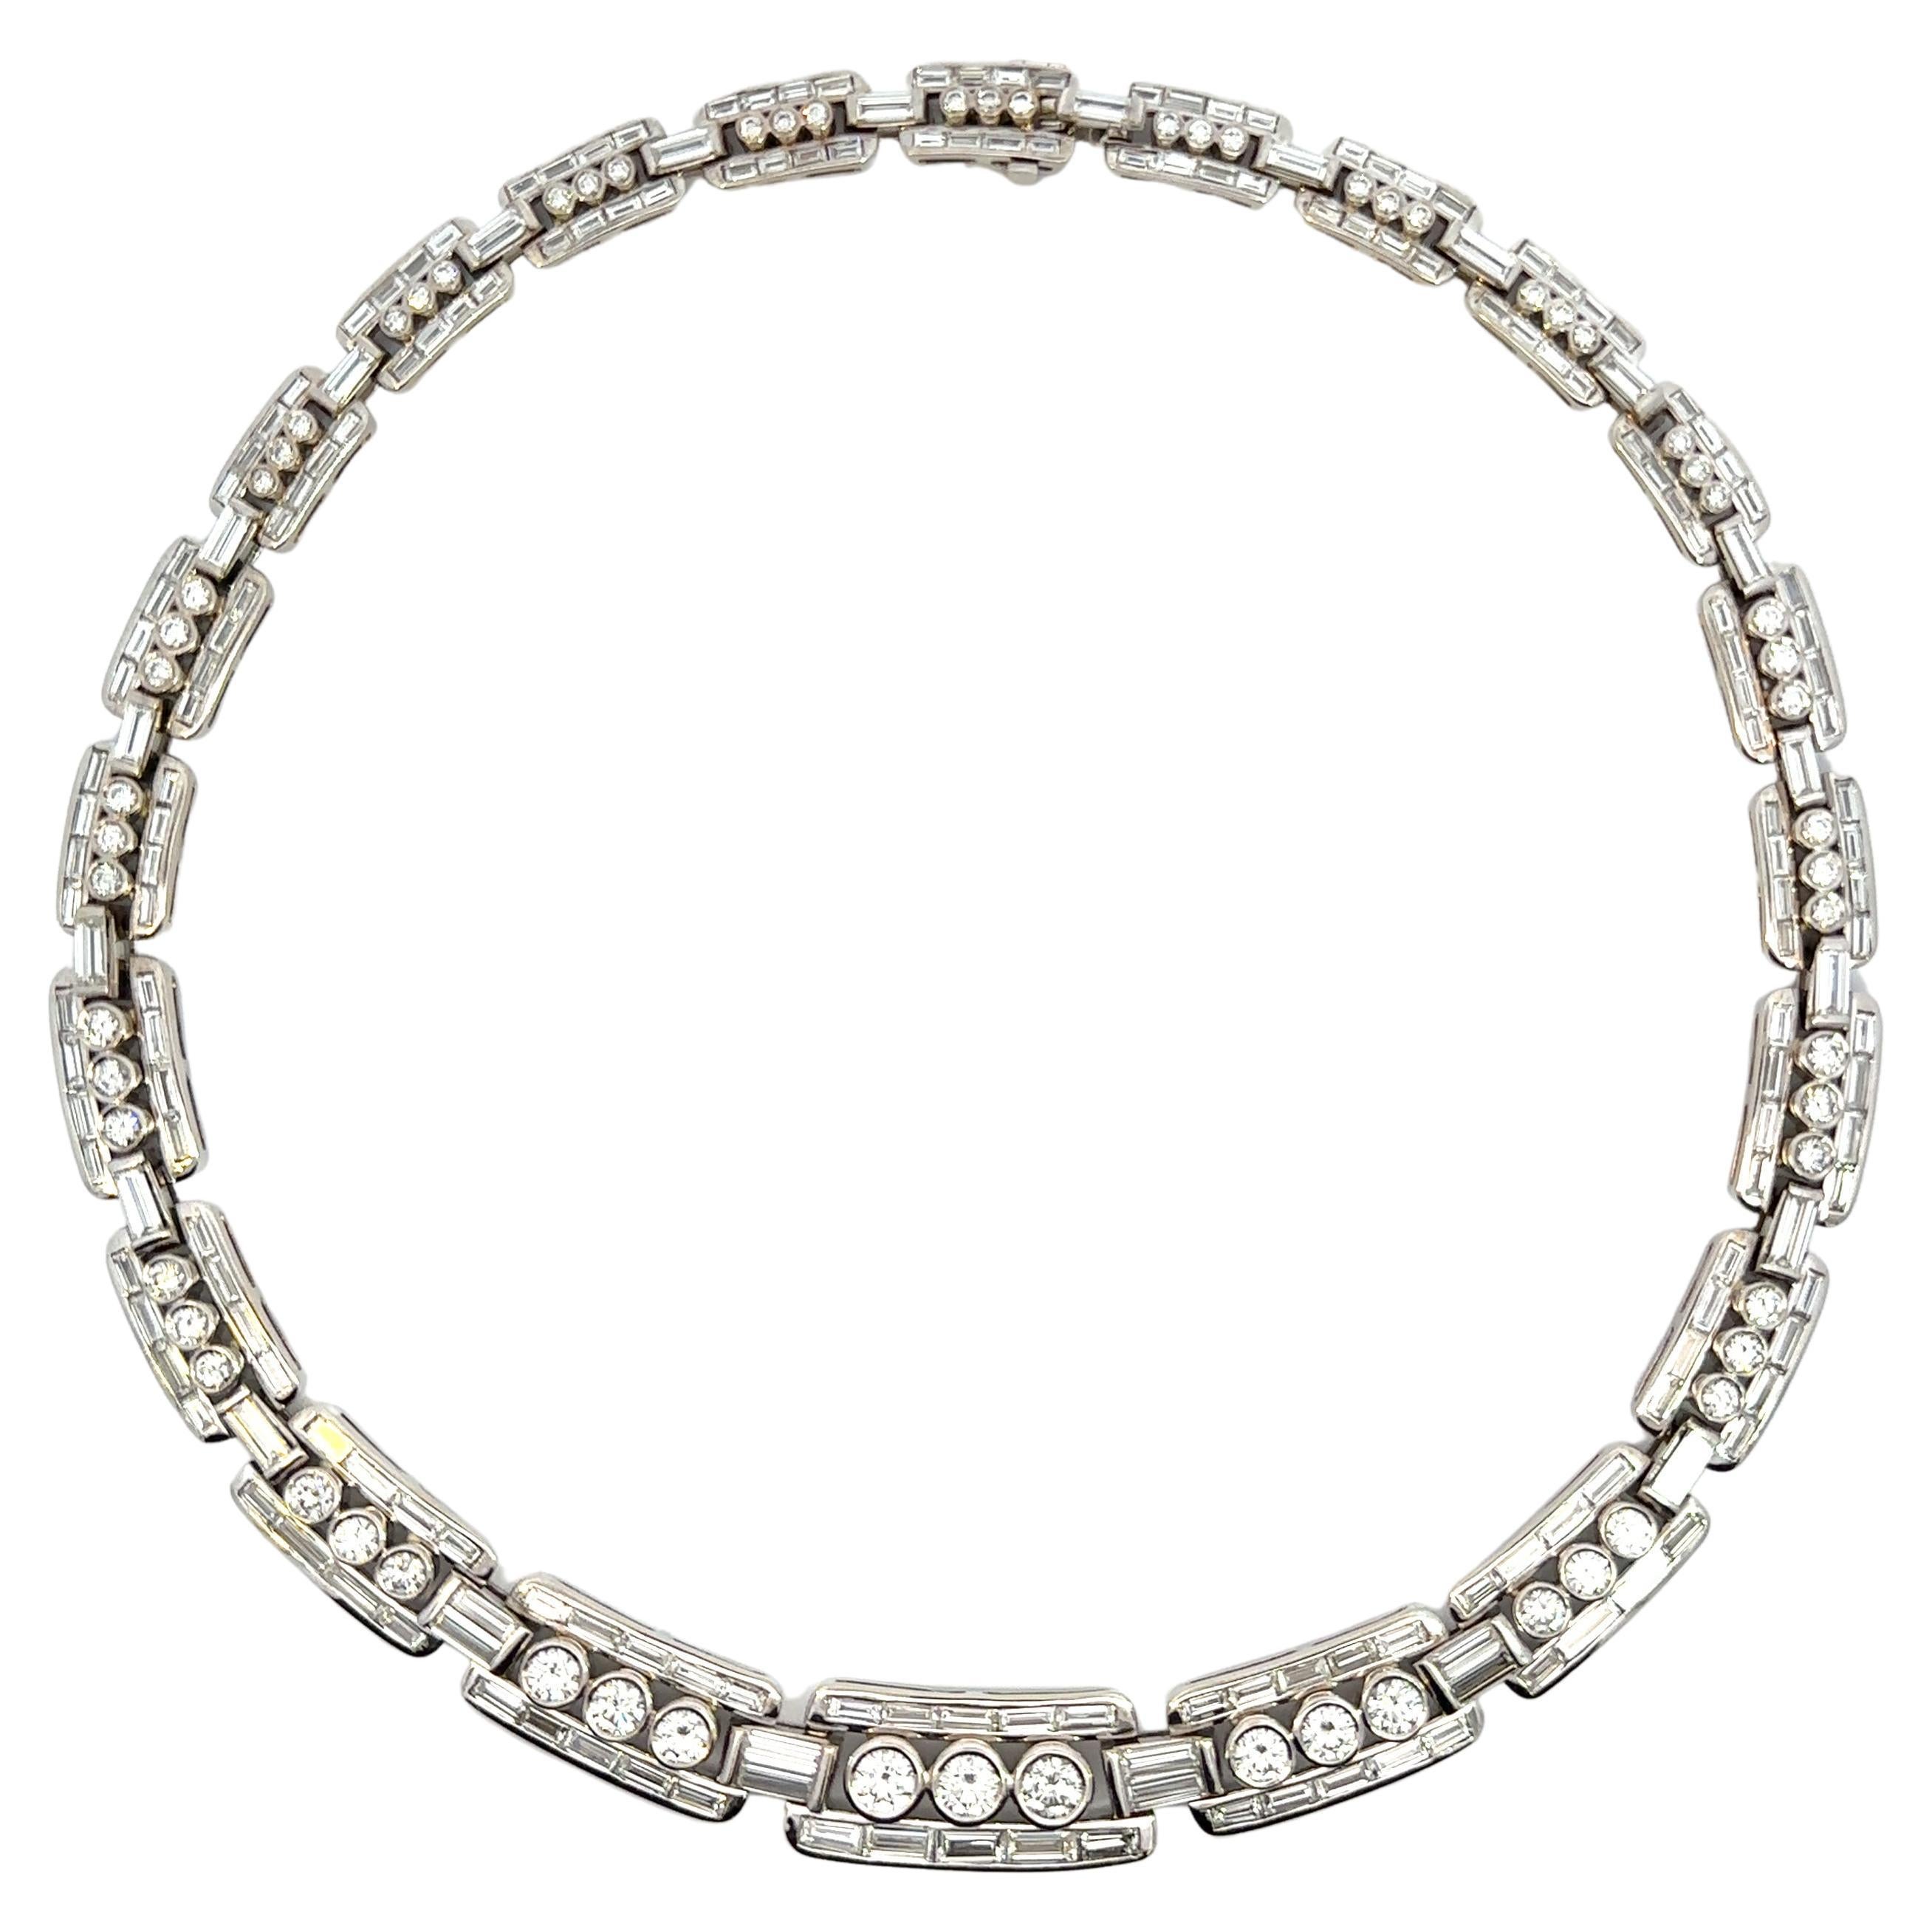 Handrafted 24.13Ct Diamond Baguette and Brilliant Cut Diamond Necklace in 18 Kt 